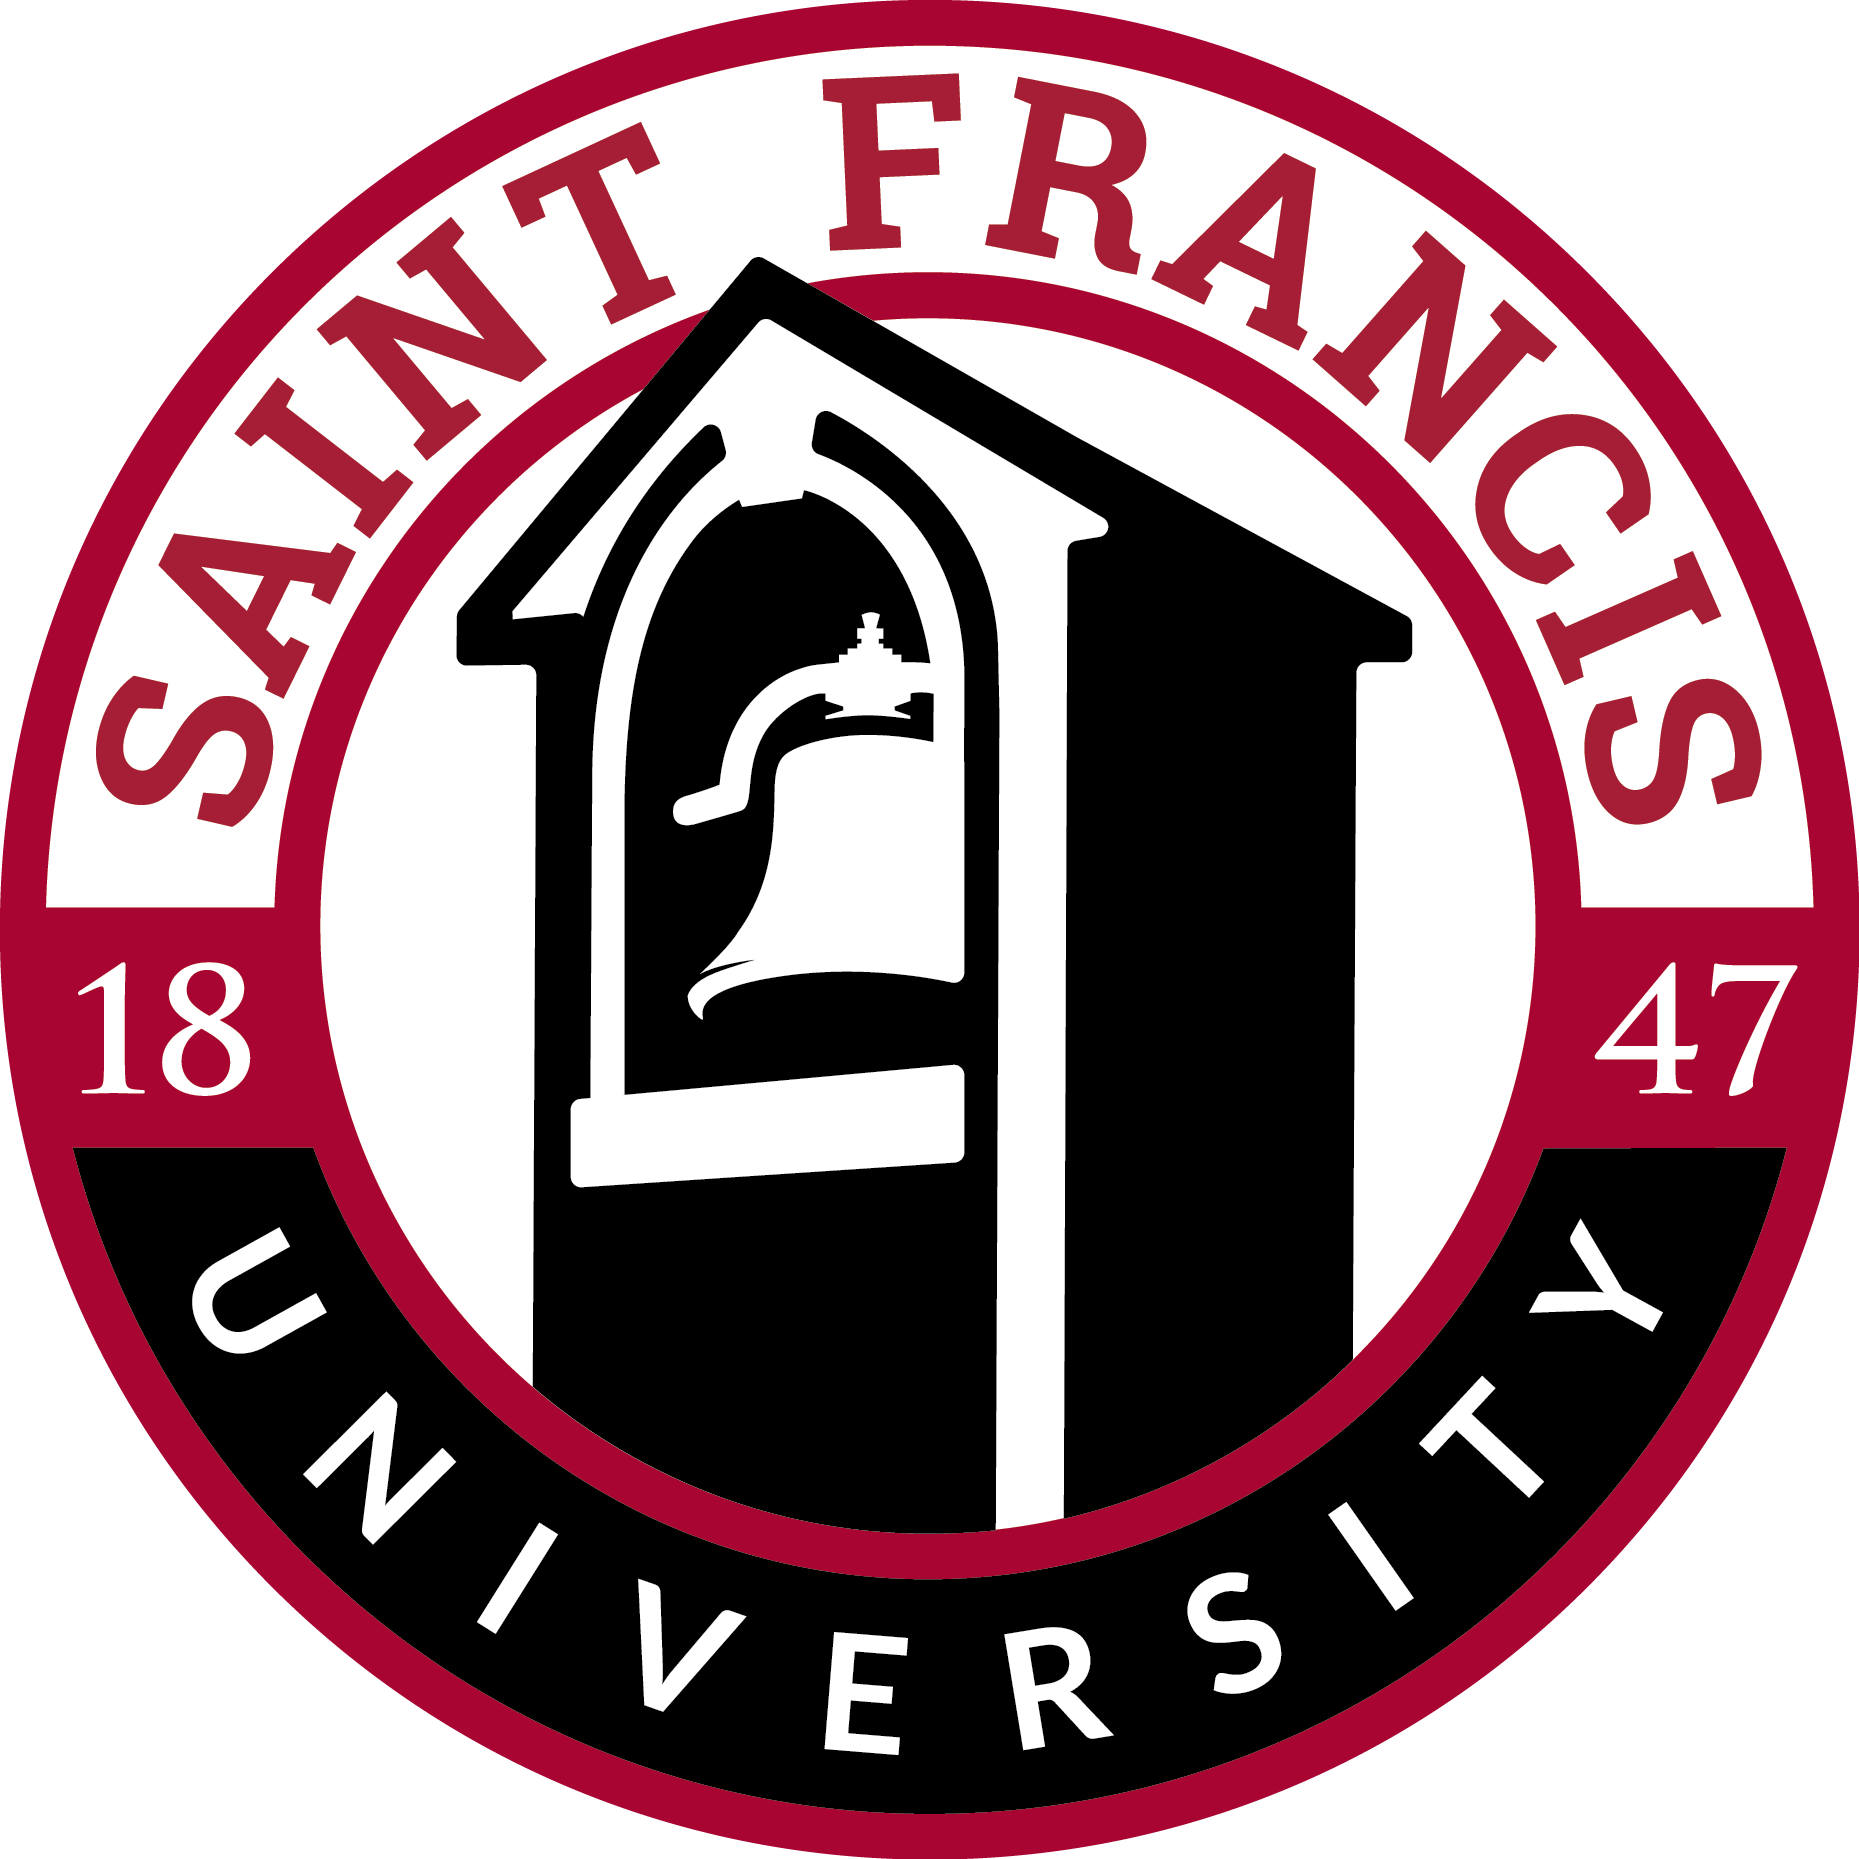 Circular St. Francis University logo, featuring a bell tower in the center